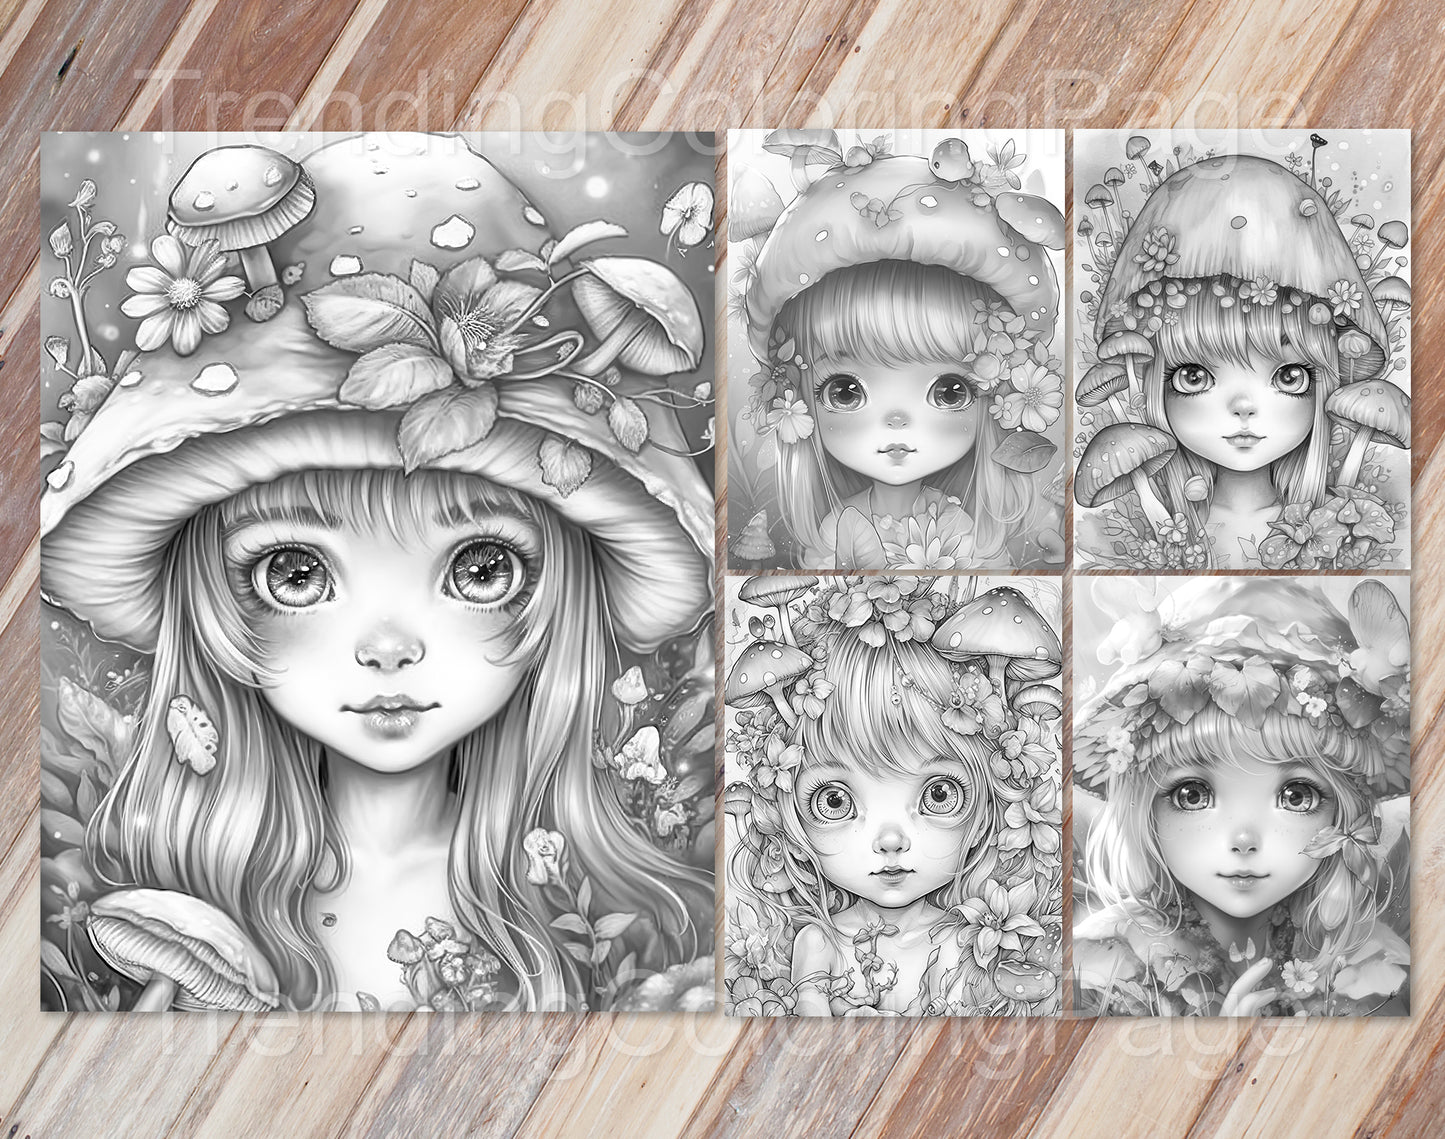 25 Mushroom Fairies Grayscale Coloring Pages - Instant Download - Printable PDF